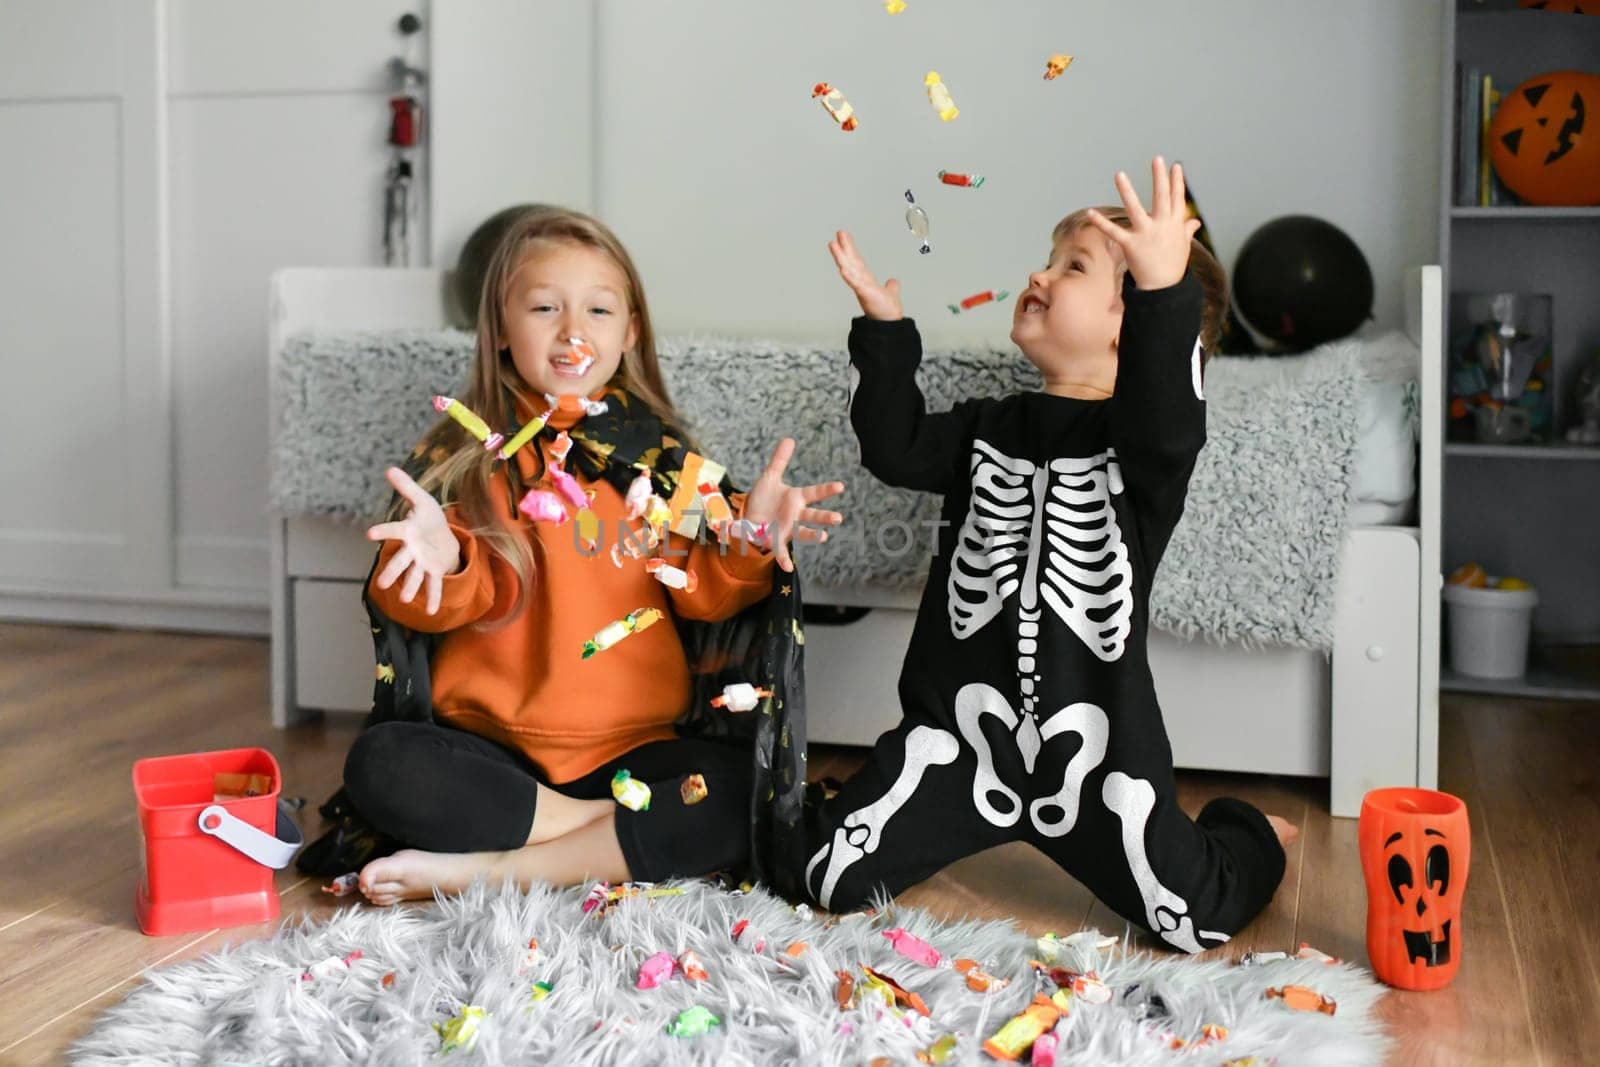 Children enjoy candy collected for Halloween by Godi